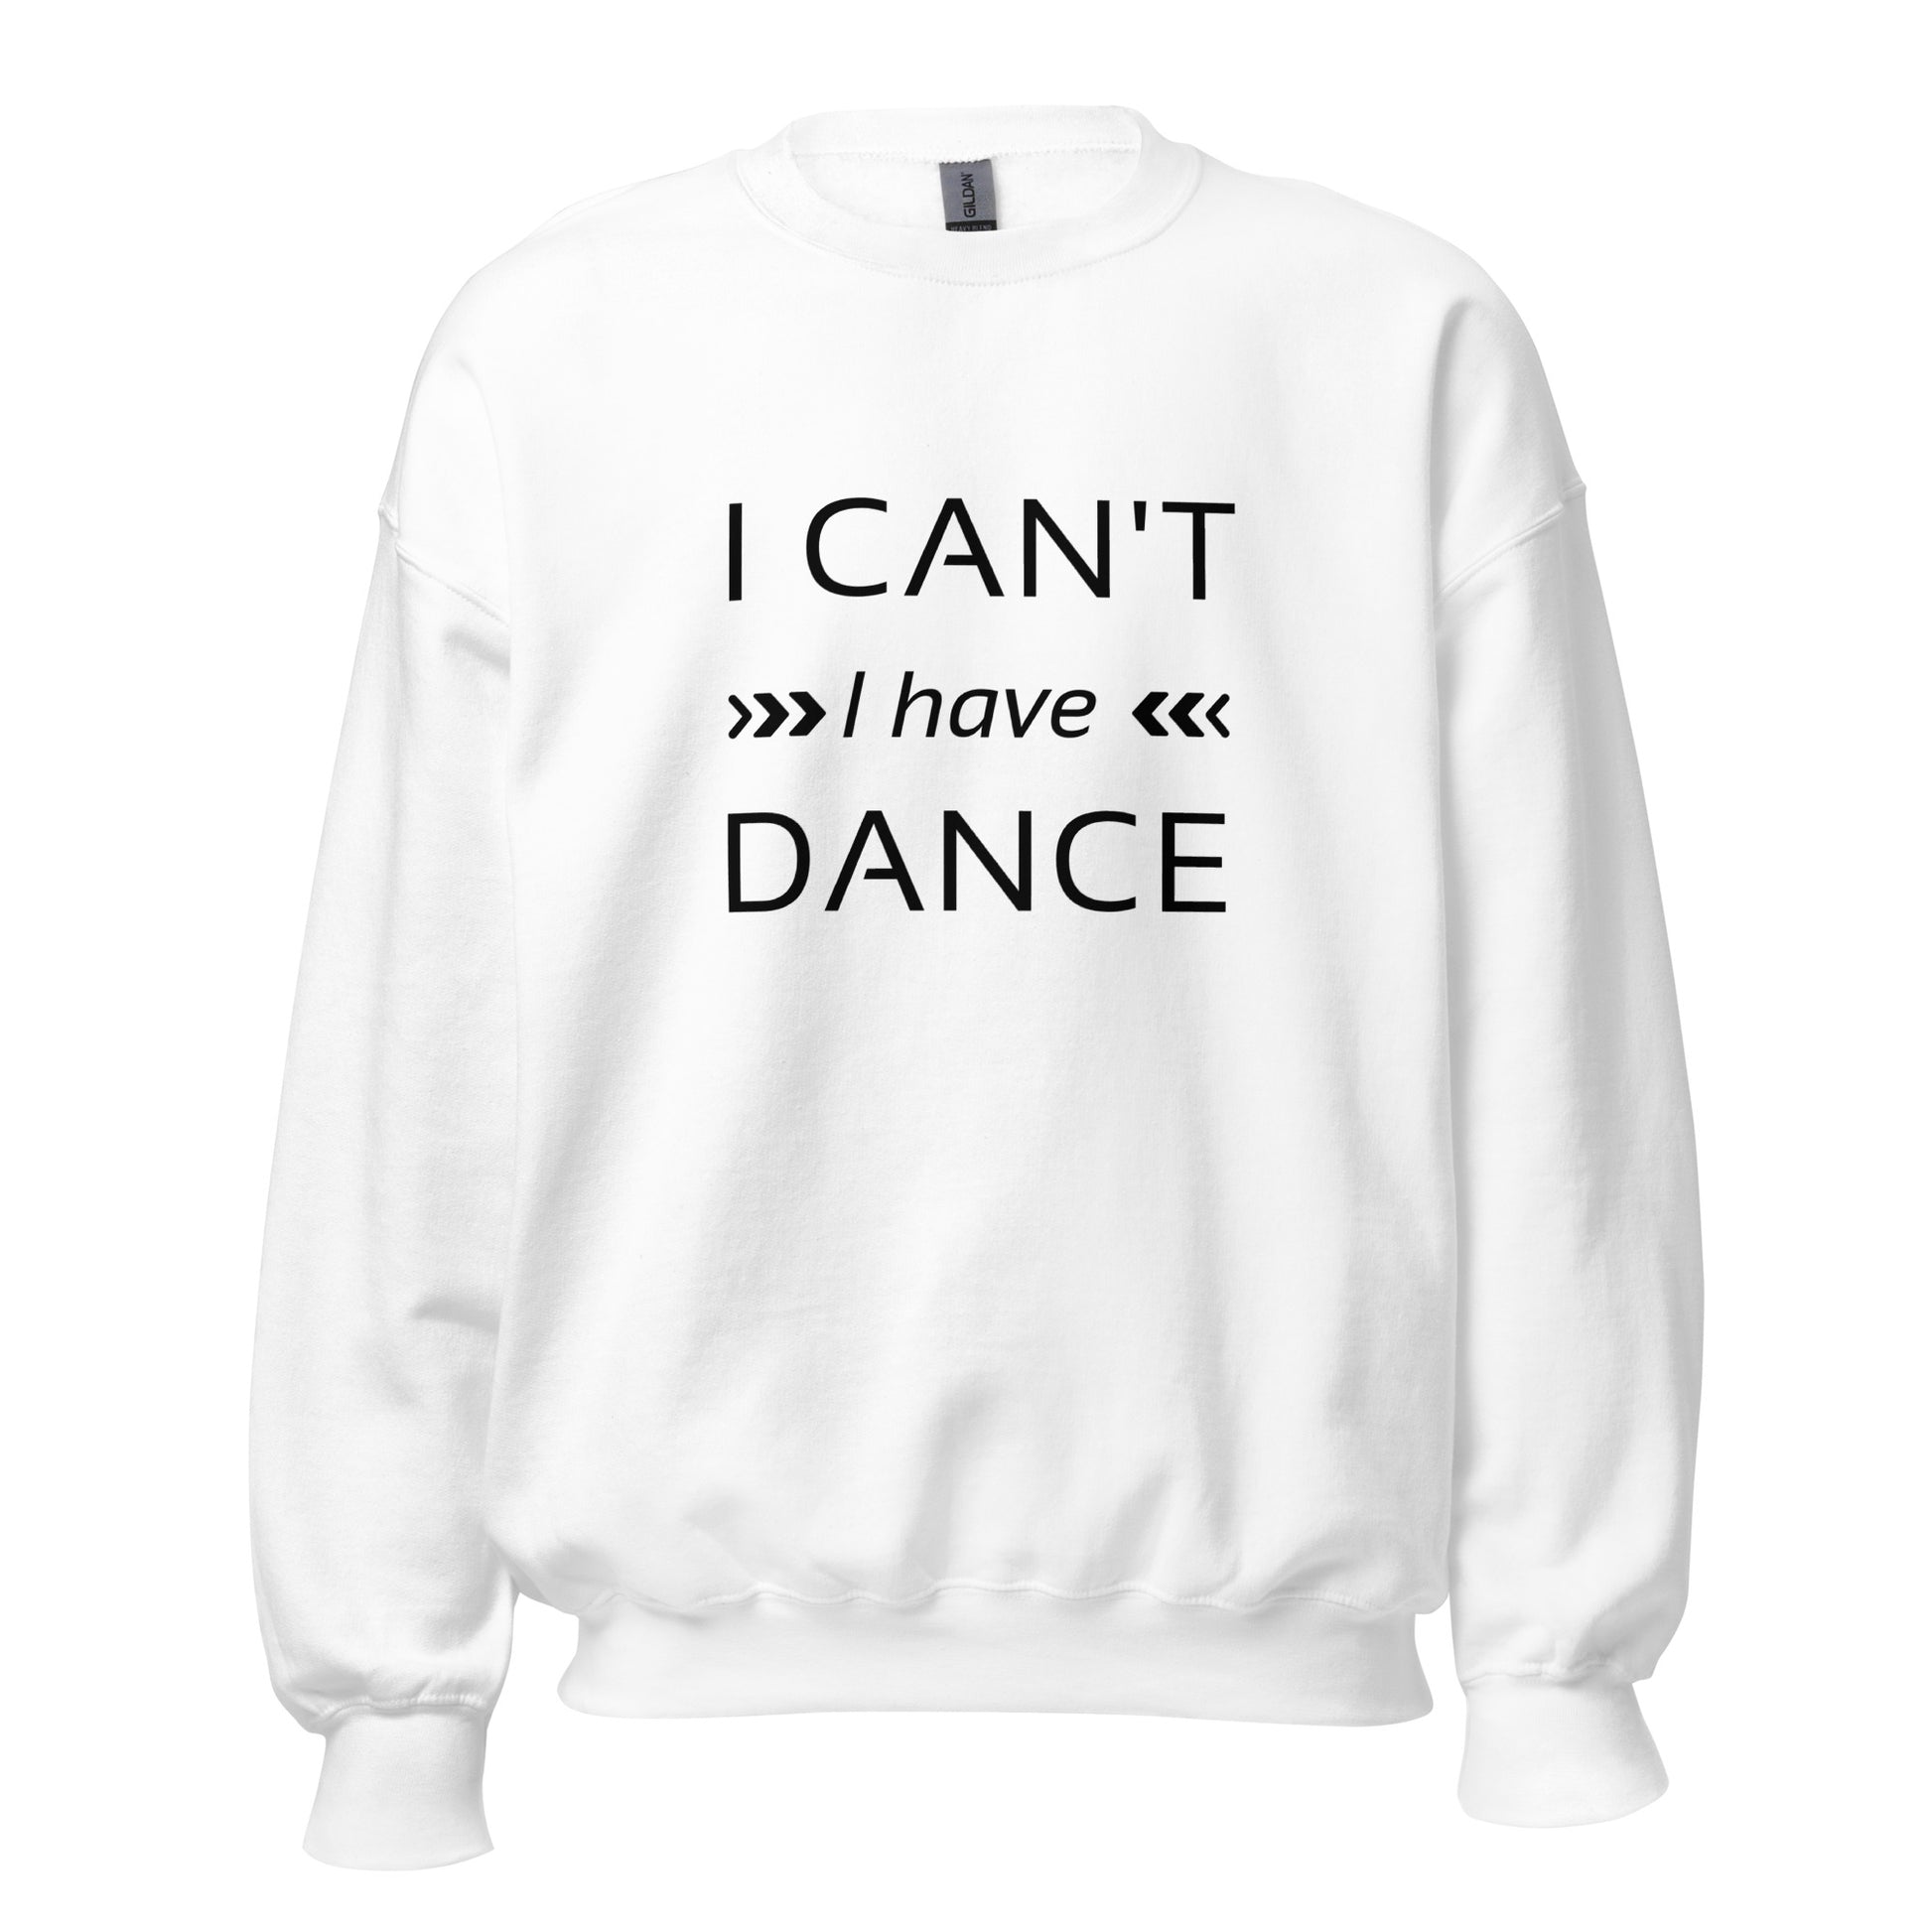 I can't I have Dance Sweatshirt - SD-style-shop